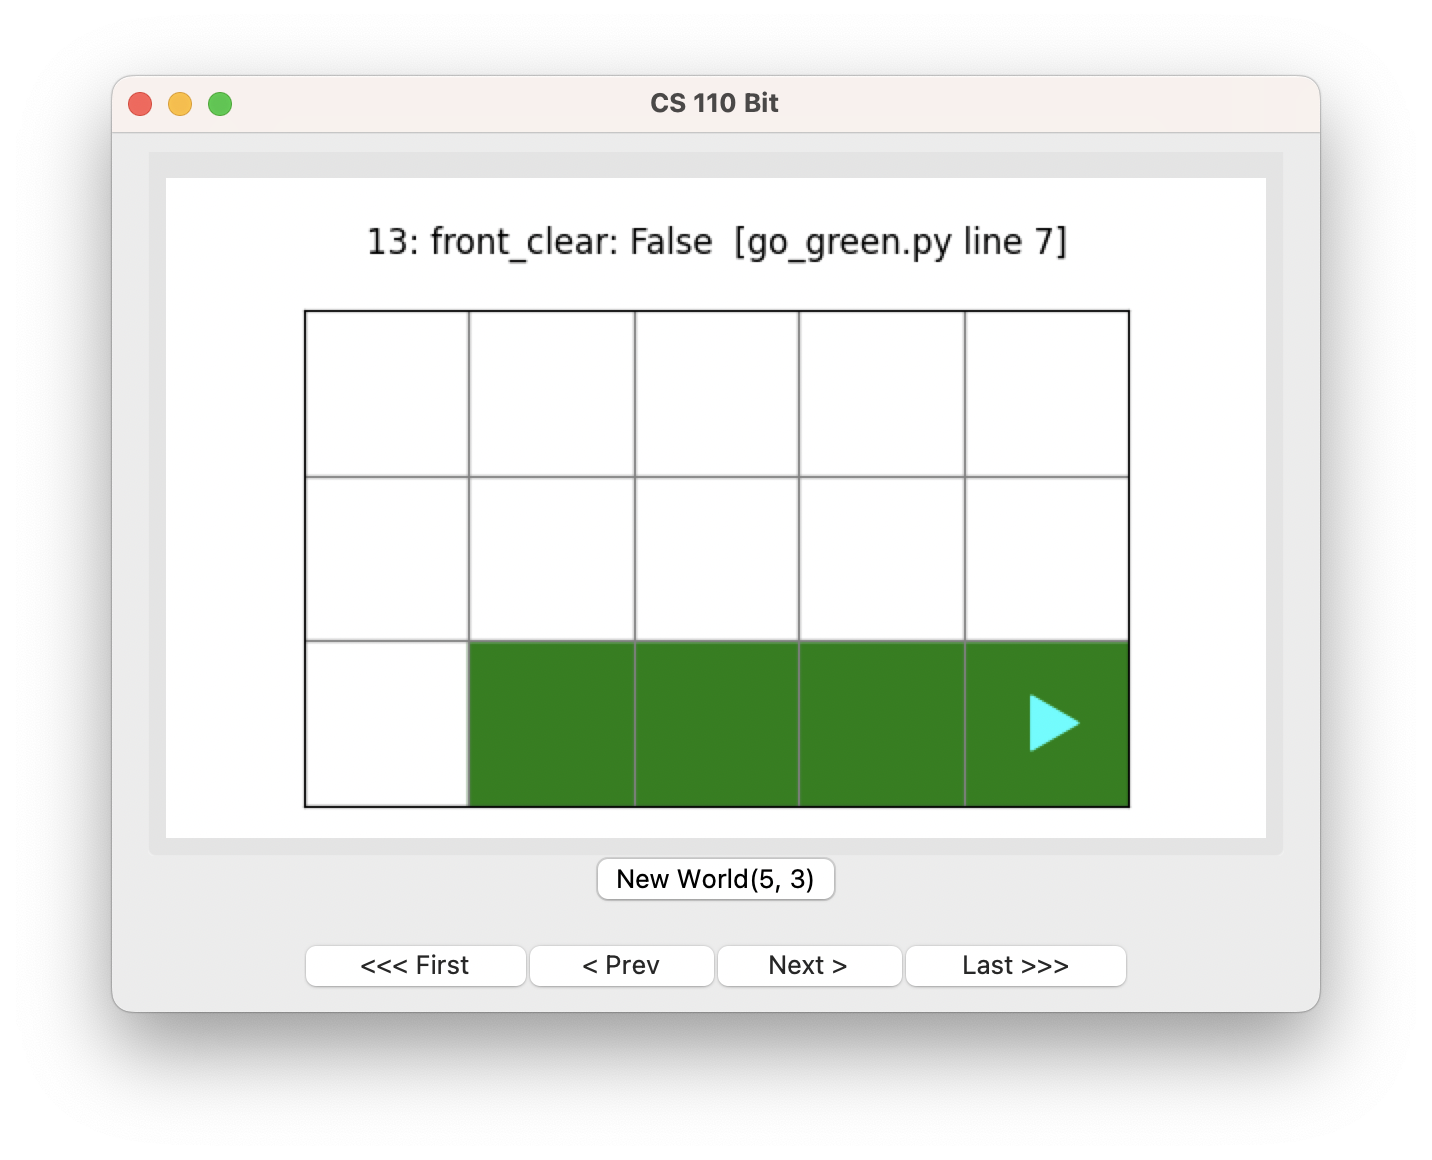 this version of go green leaves the first square blank